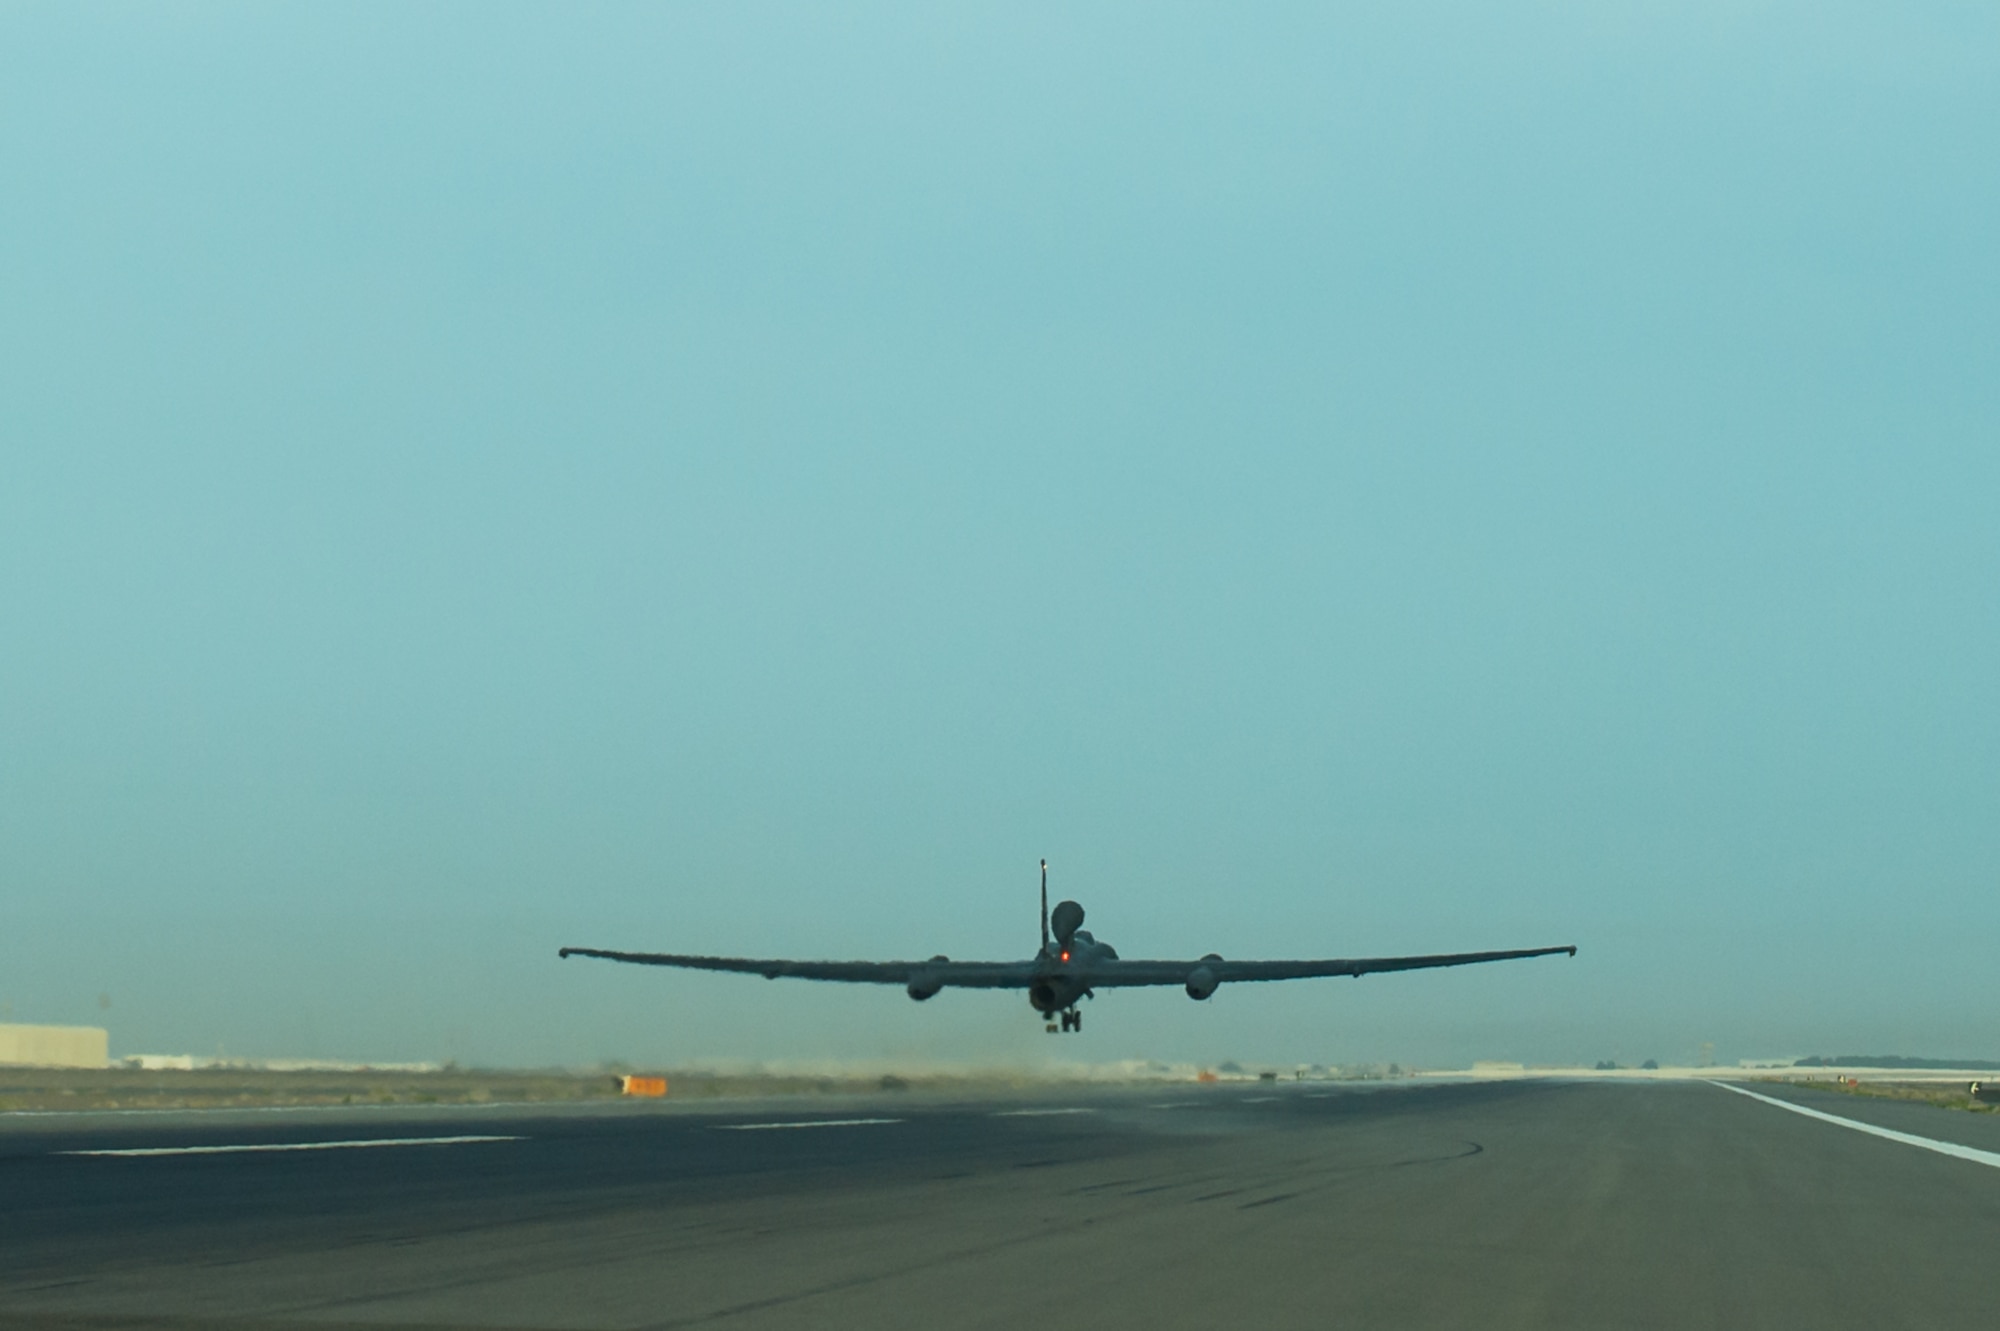 A 380th Air Expeditionary Wing U-2 launches from a flight line on a sortie in support of Combined Joint Task Force- Operation Inherent Resolve at an undisclosed location in Southwest Asia, Feb. 2, 2017. During this flight the airframe reached 30,000 flight hours. This is the second U-2 to reach this milestone out of the U-2 fleet. However, this achievement was the first while serving Air Force Central Command in an expeditionary environment. (U.S. Air Force photo/Senior Airman Tyler Woodward)